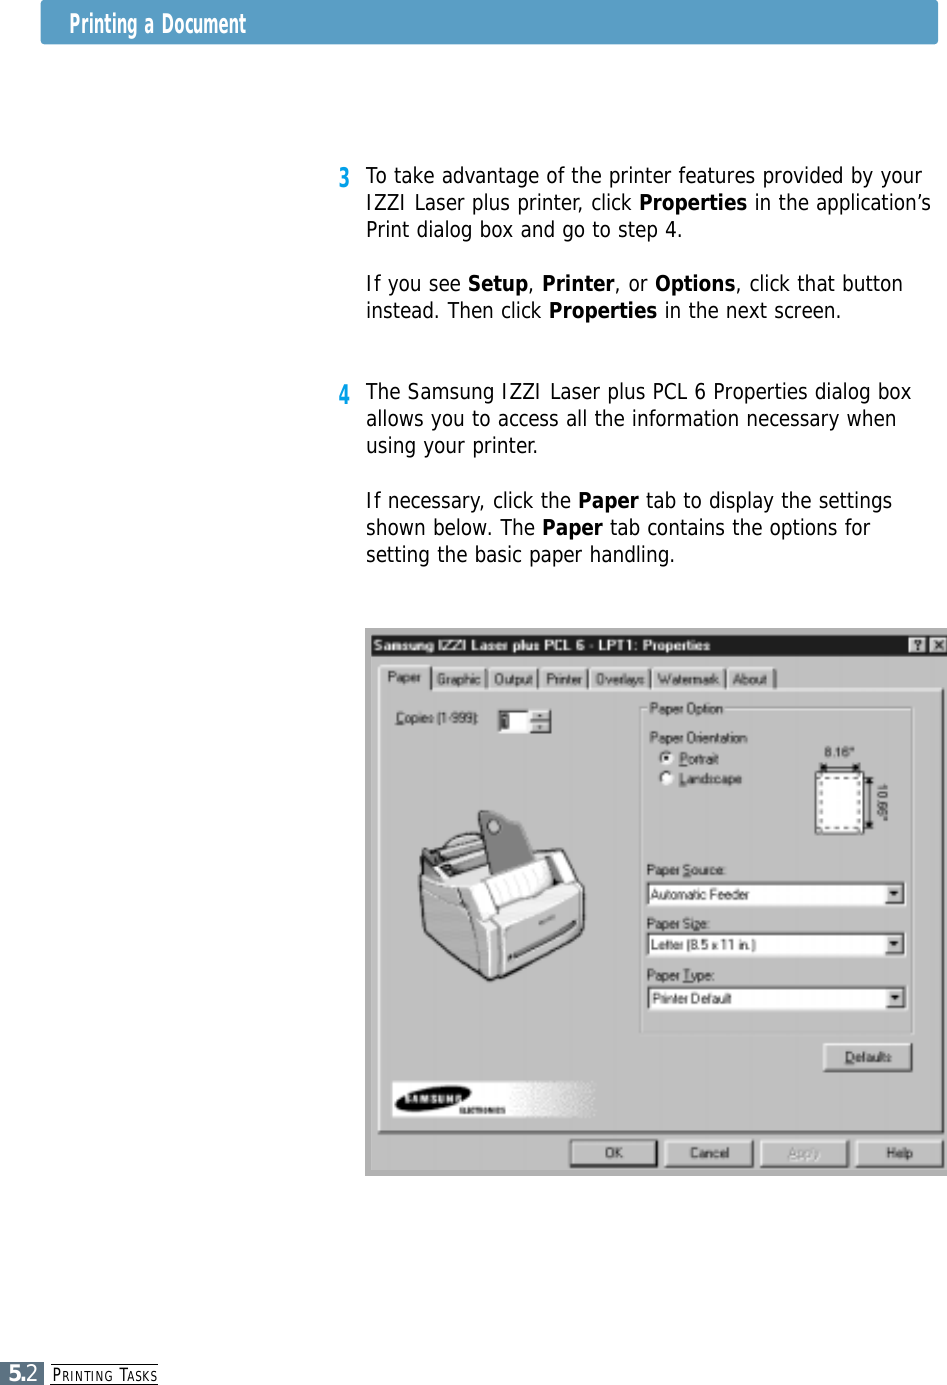 PRINTING TASKS5.2Printing a Document3To take advantage of the printer features provided by yourIZZI Laser plus printer, click Properties in the application’sPrint dialog box and go to step 4. If you see Setup, Printer, or Options, click that buttoninstead. Then click Properties in the next screen.4The Samsung IZZI Laser plus PCL 6 Properties dialog boxallows you to access all the information necessary whenusing your printer.If necessary, click the Paper tab to display the settingsshown below. The Paper tab contains the options forsetting the basic paper handling.